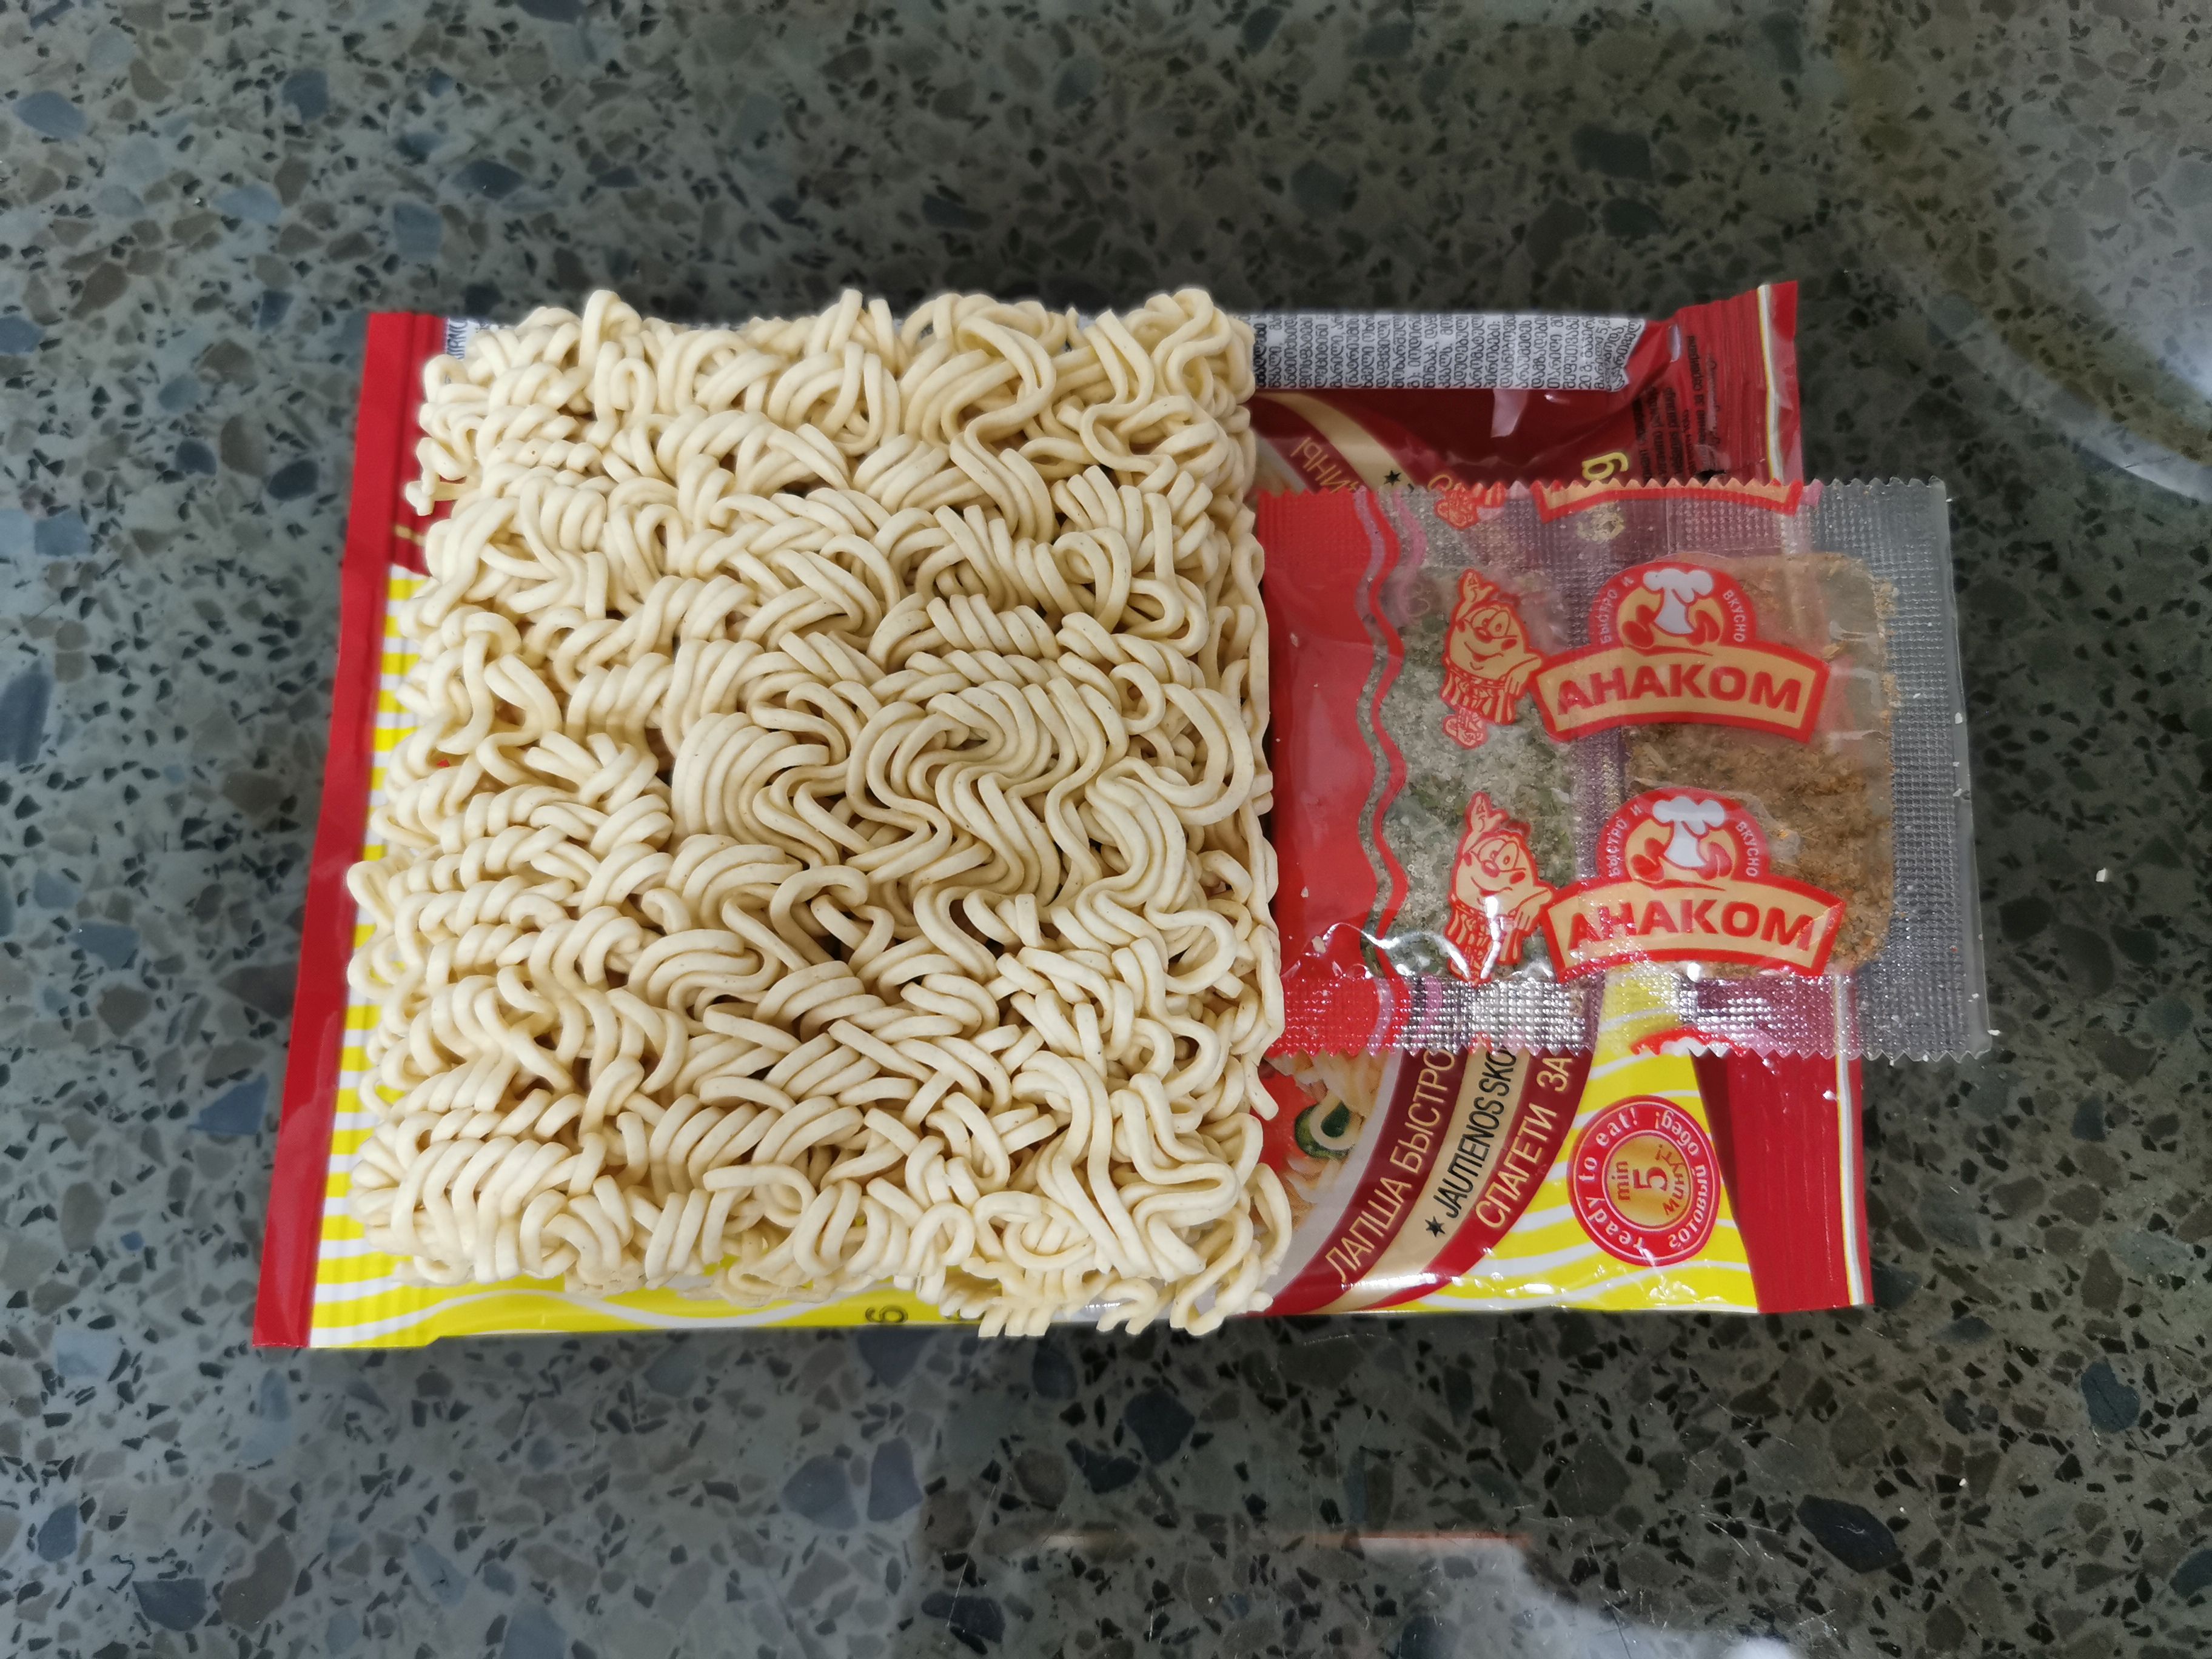 #2297: Anacom "Instant Noodles with Beef Flavour"